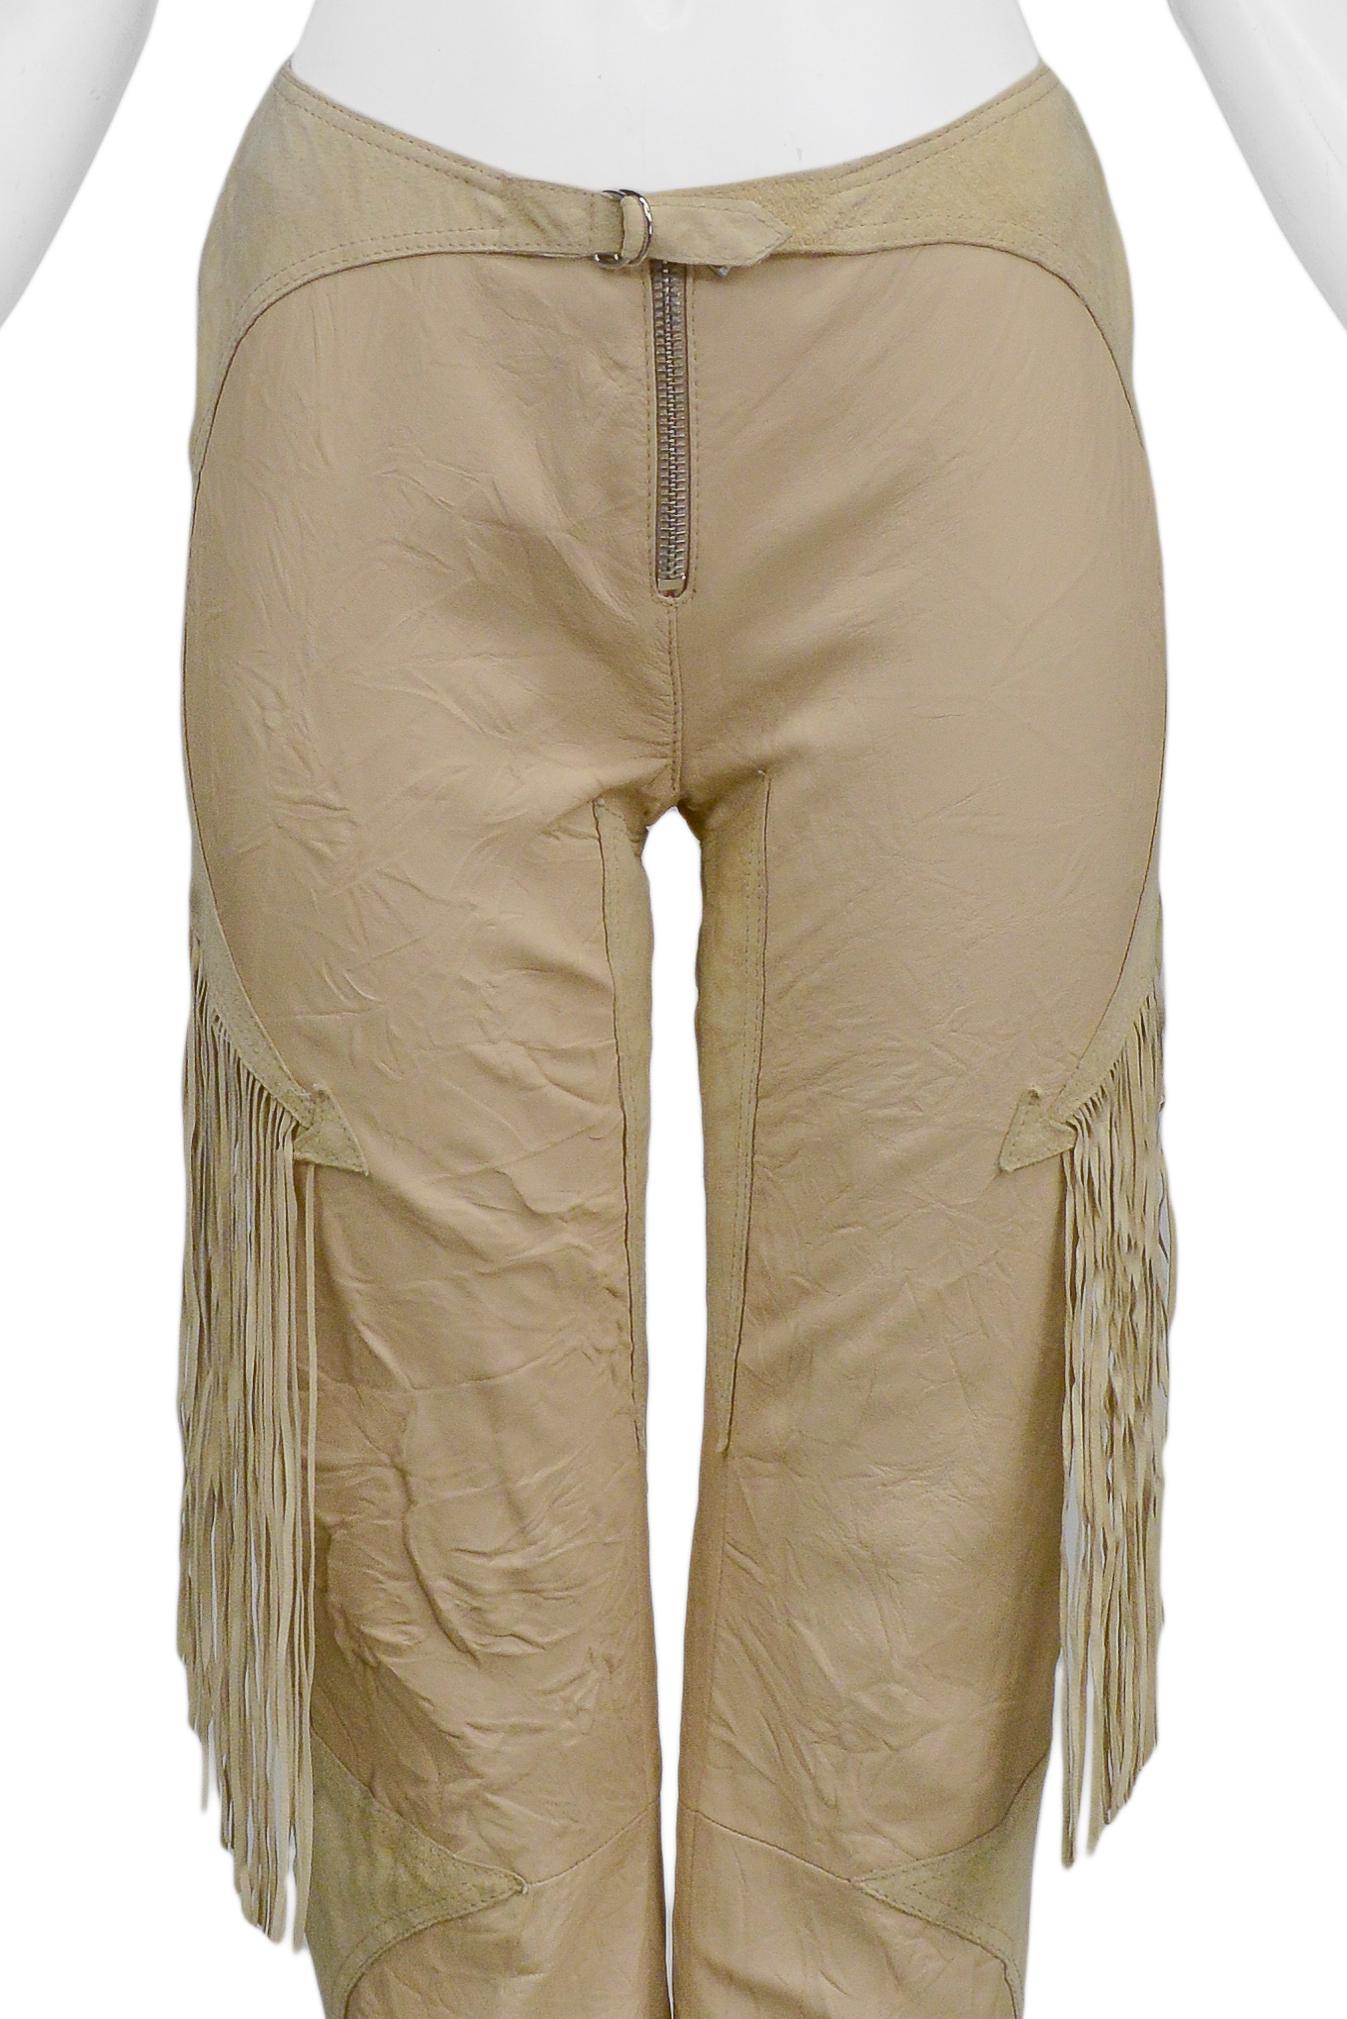 Resurrection Vintage is excited to offer a pair of vintage Versace tan crinkle leather pants featuring an exposed silver-tone center front zipper, attached yoke with buckle, fringe at the sides and back, arrow inserts, ankle zippers, and tan lining.